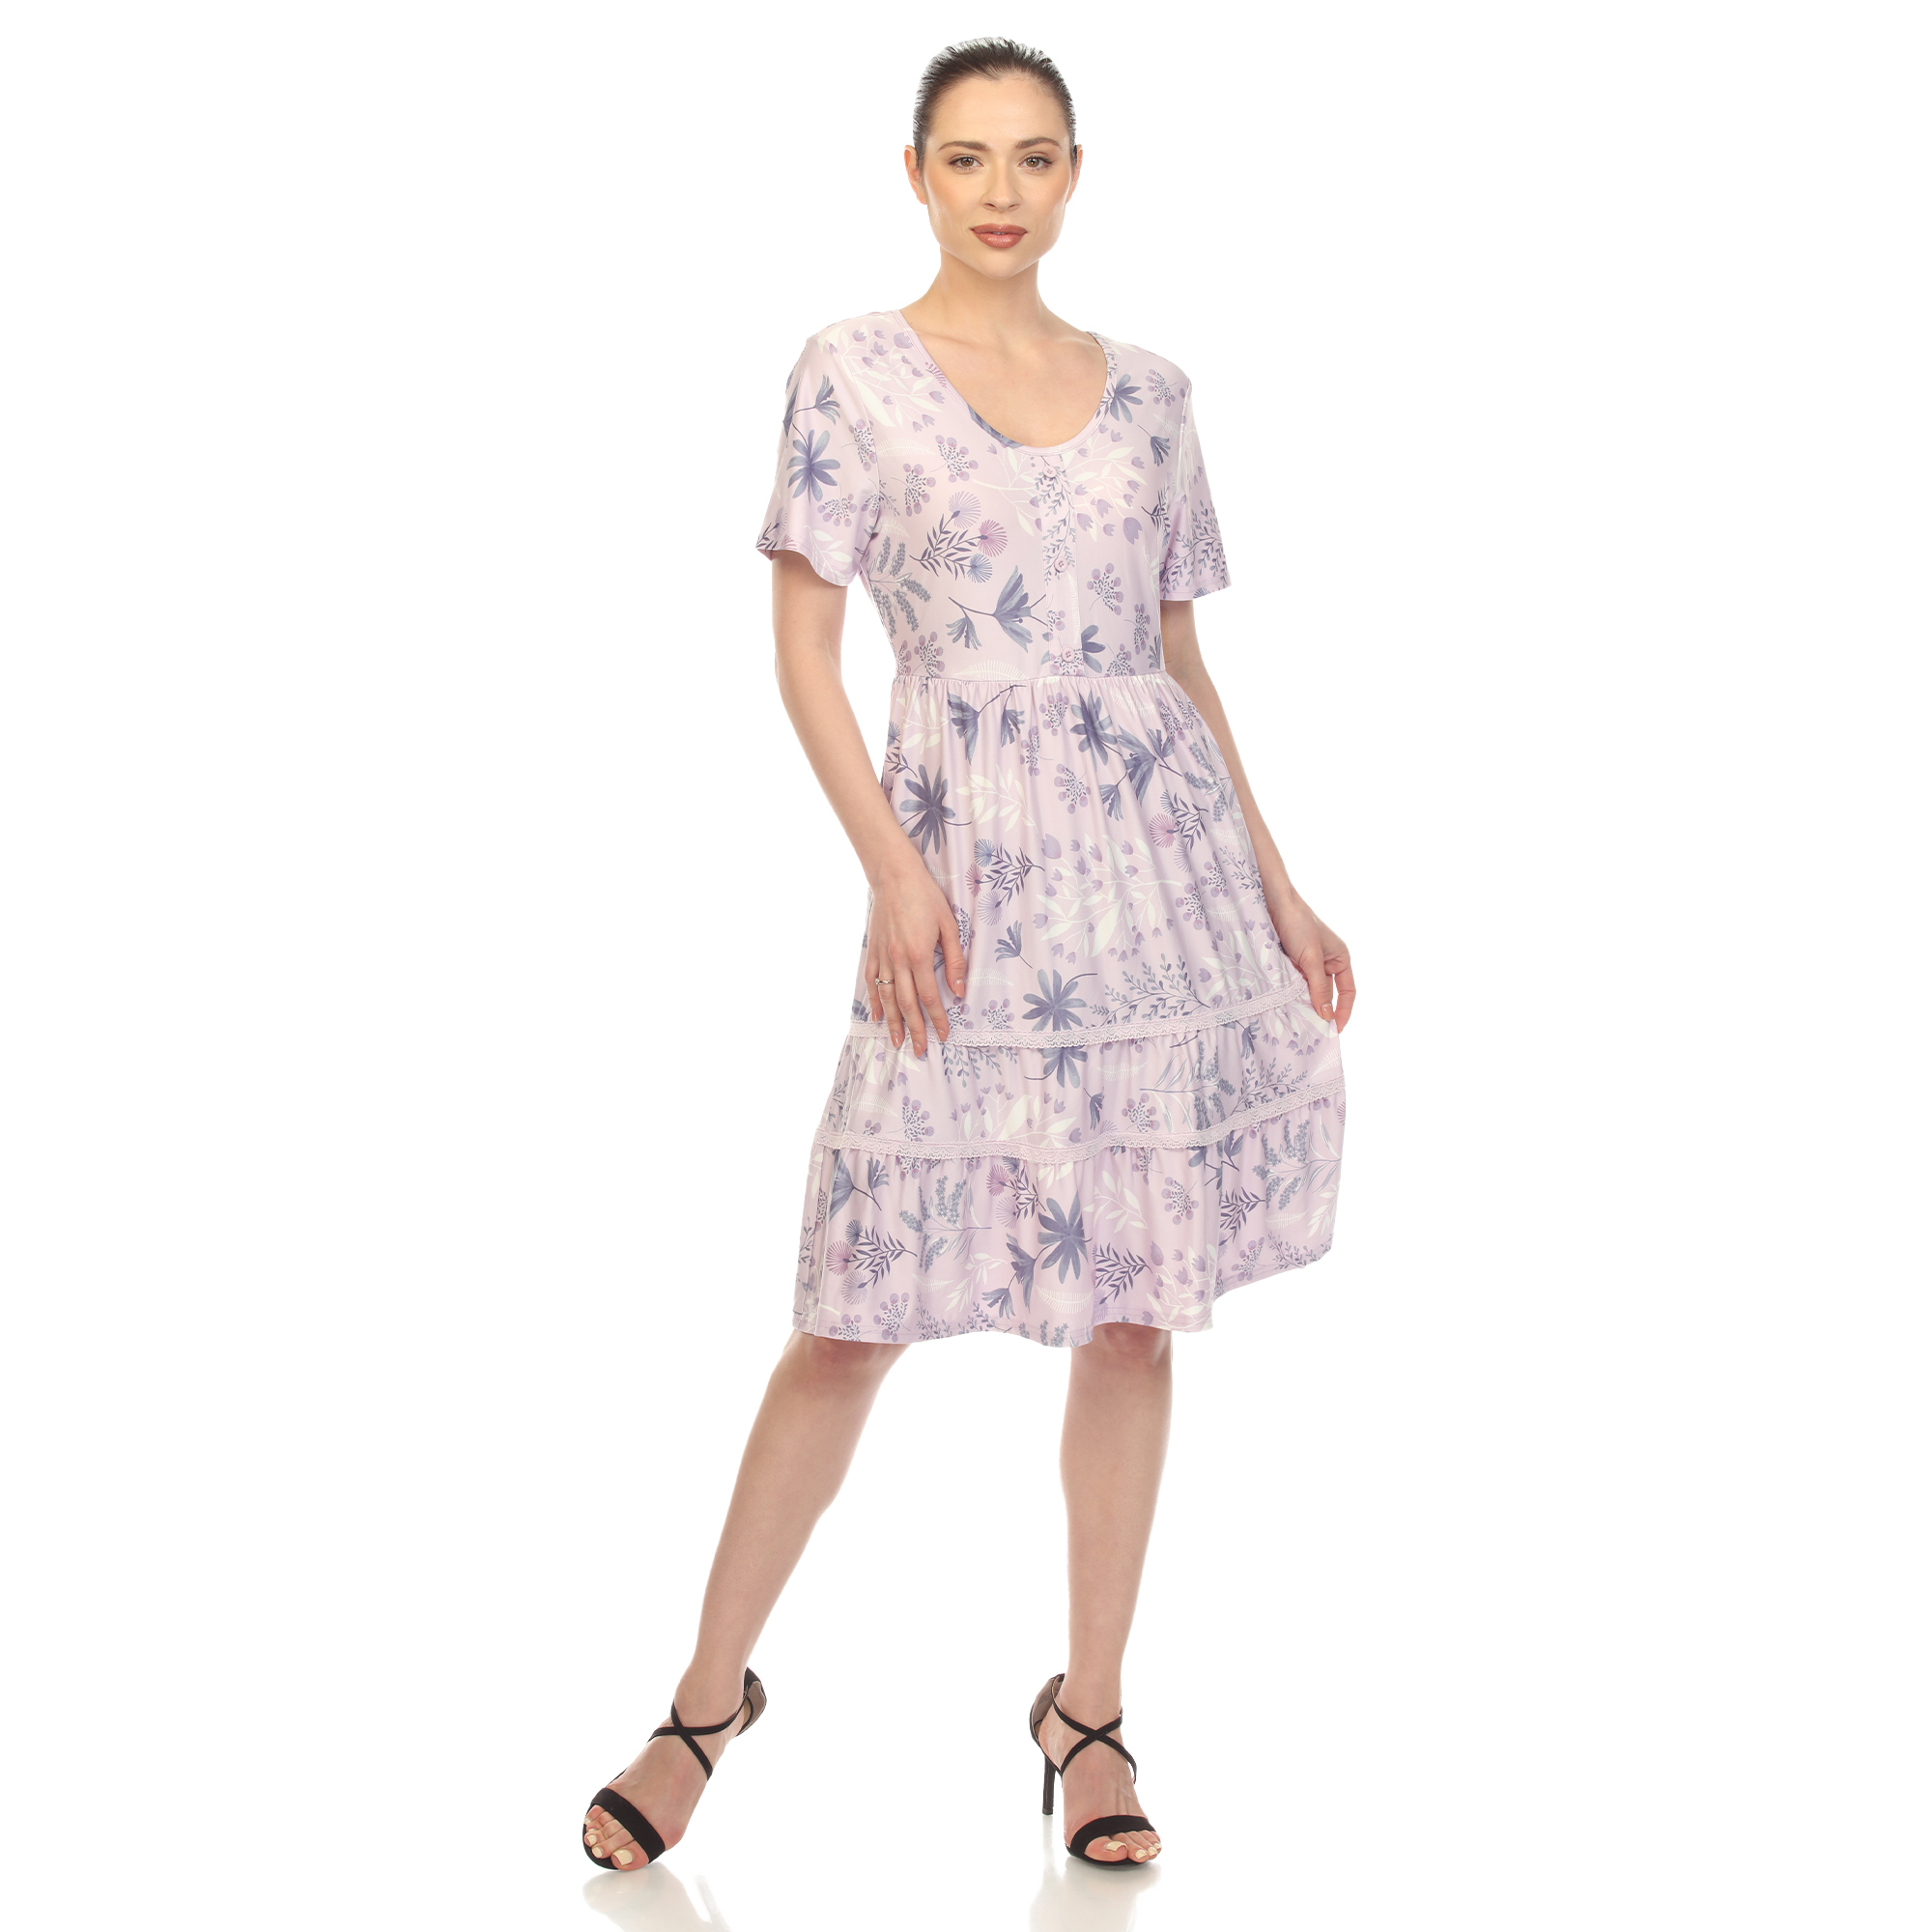 White Mark Women's Floral Short Sleeve Knee Length Tiered Dress - Lavender, Small